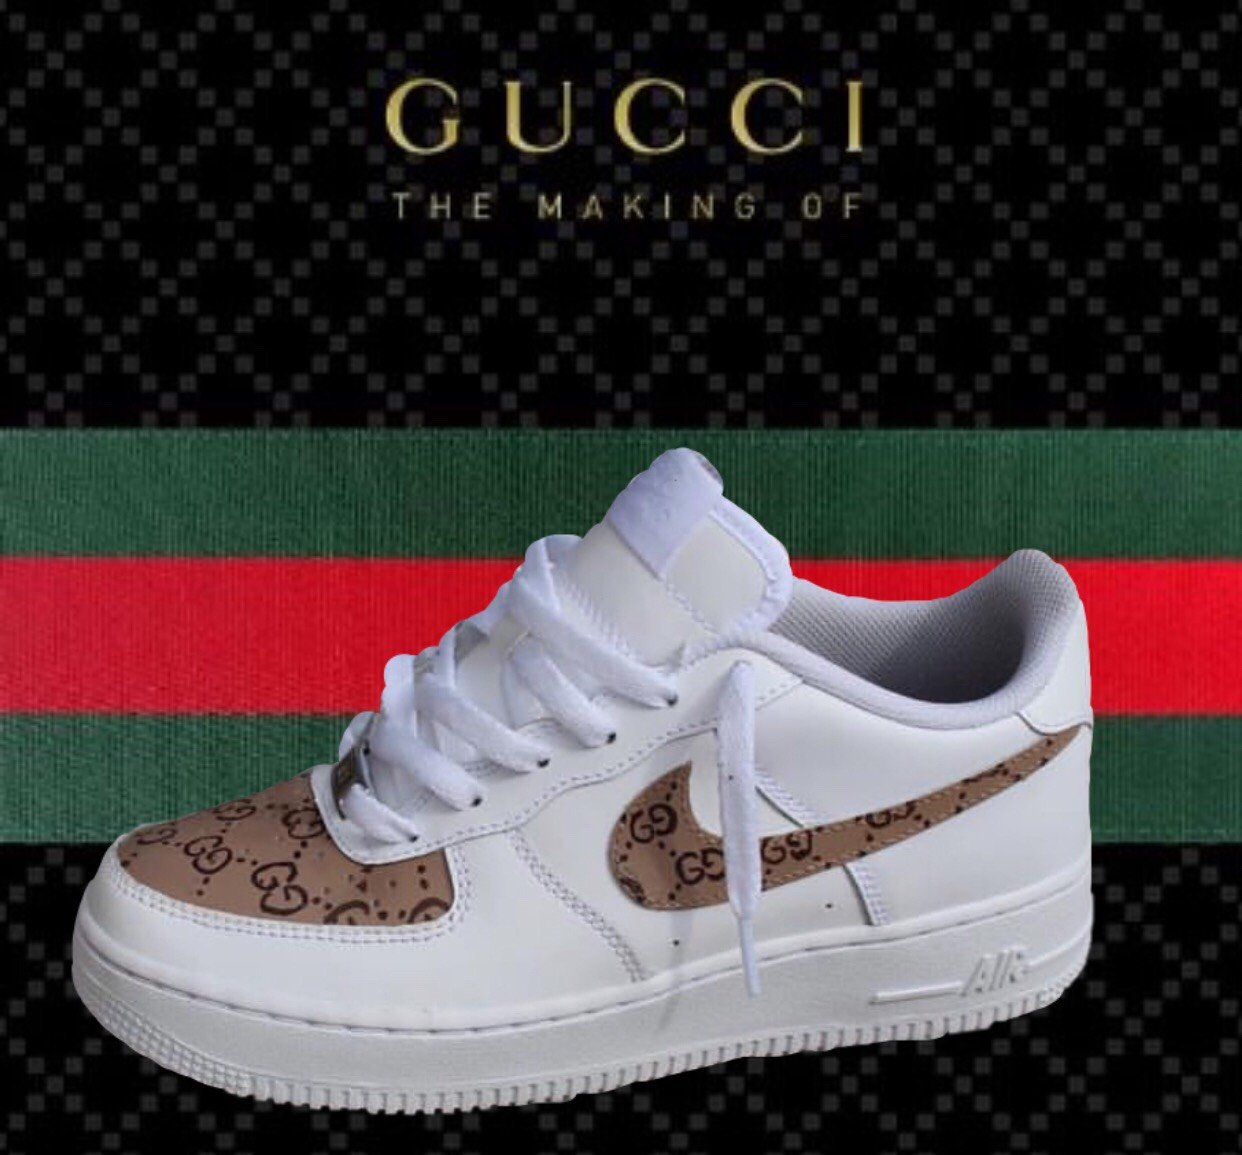 gucci airforce 1s